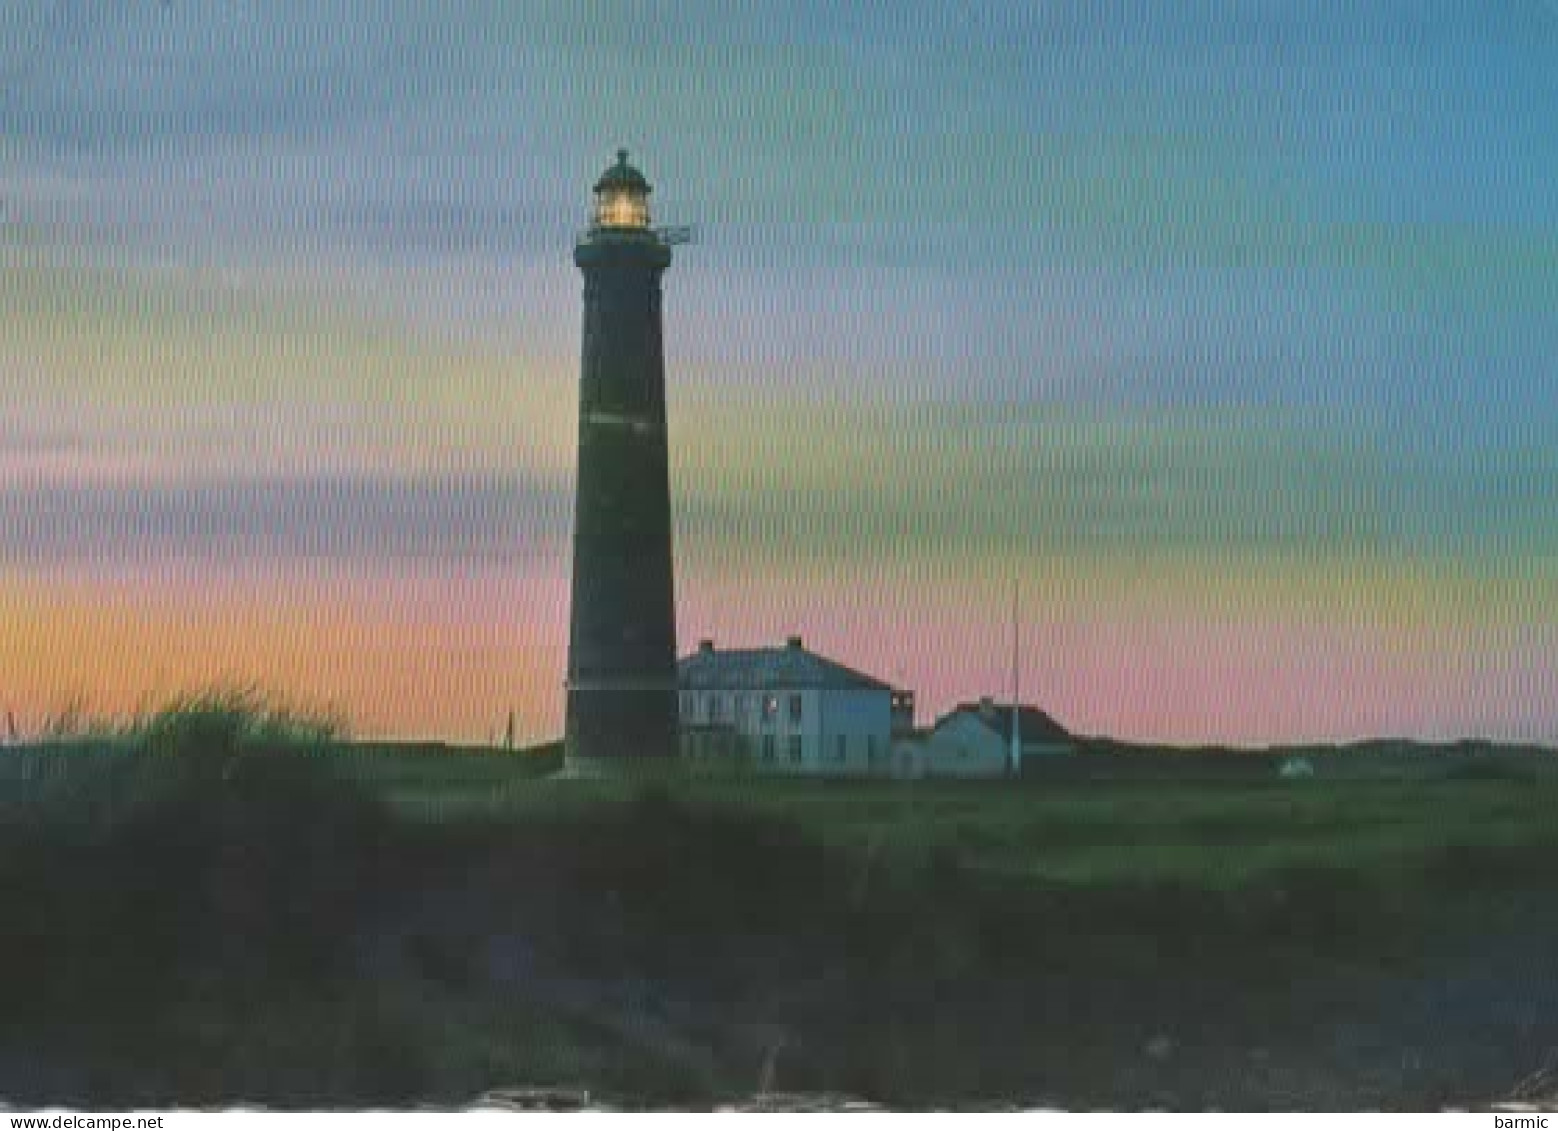 VESTERHAVER AFTENSTEMMING VED FYRTAARNET THE NORTH SEA EVENING ATMOSPHERE AT THE LIGHTOUSE COULEUR  REF 15899 - Phares